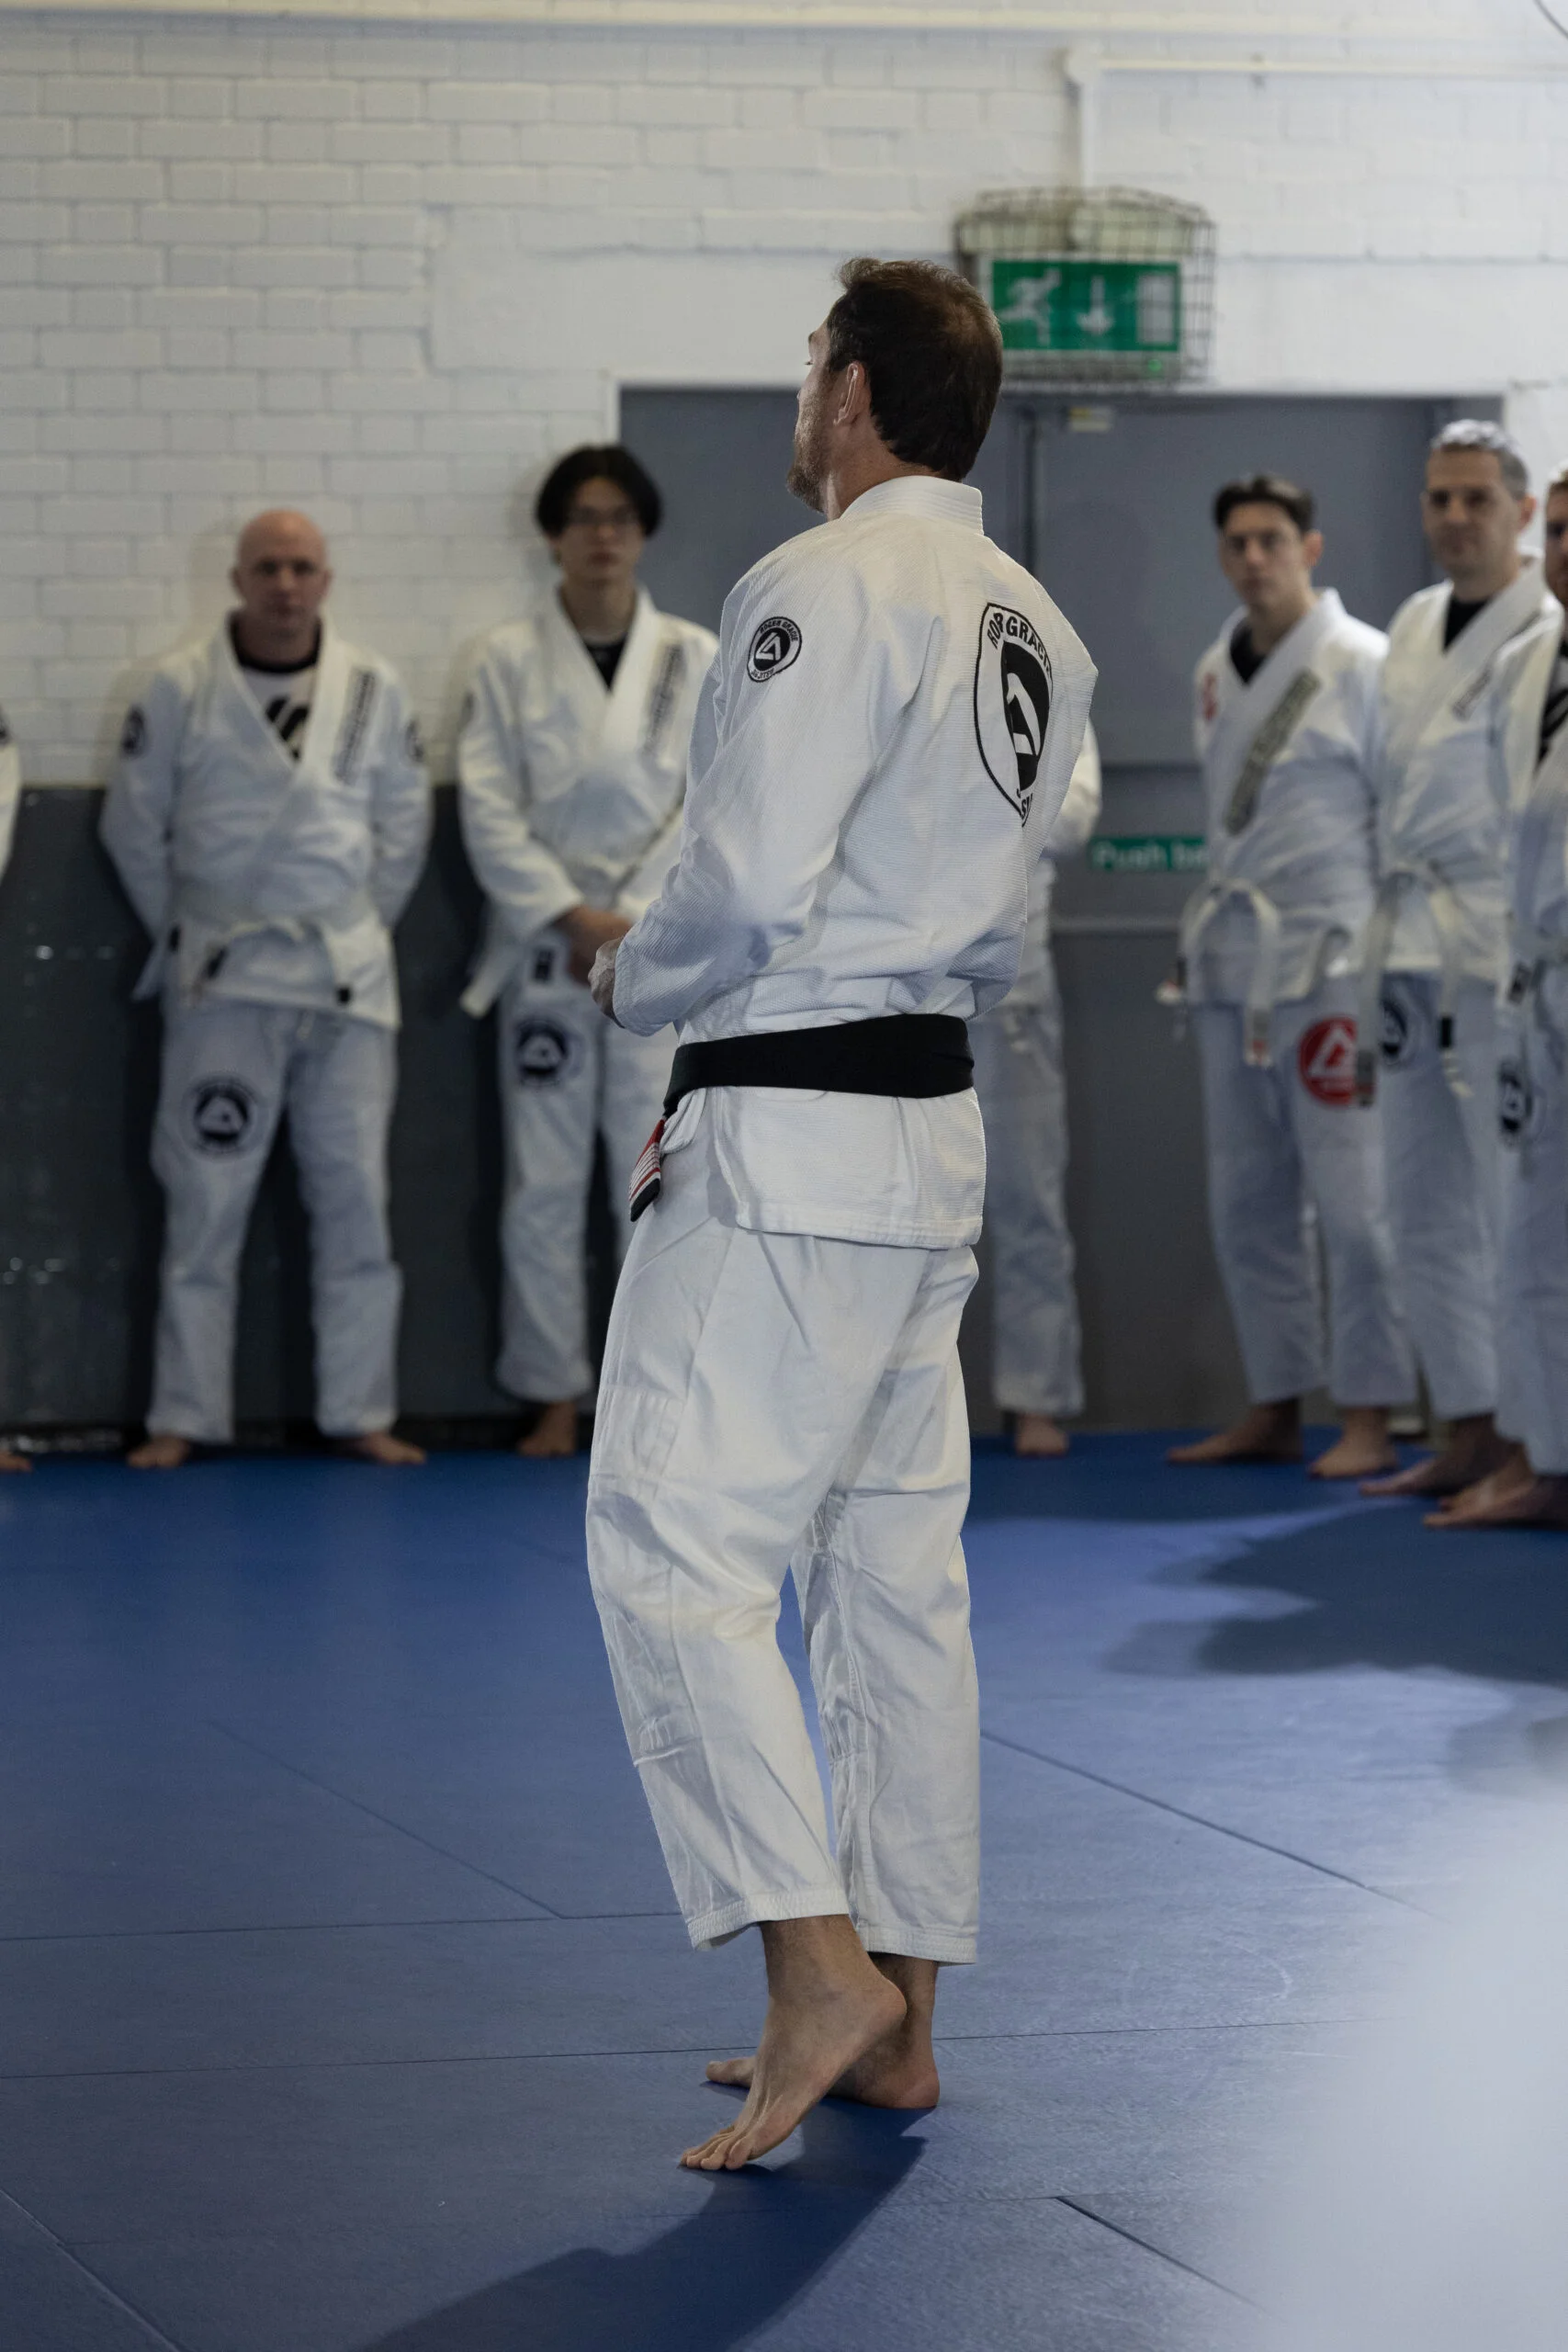 Roger Gracie talking to the class on the centre of the mats.